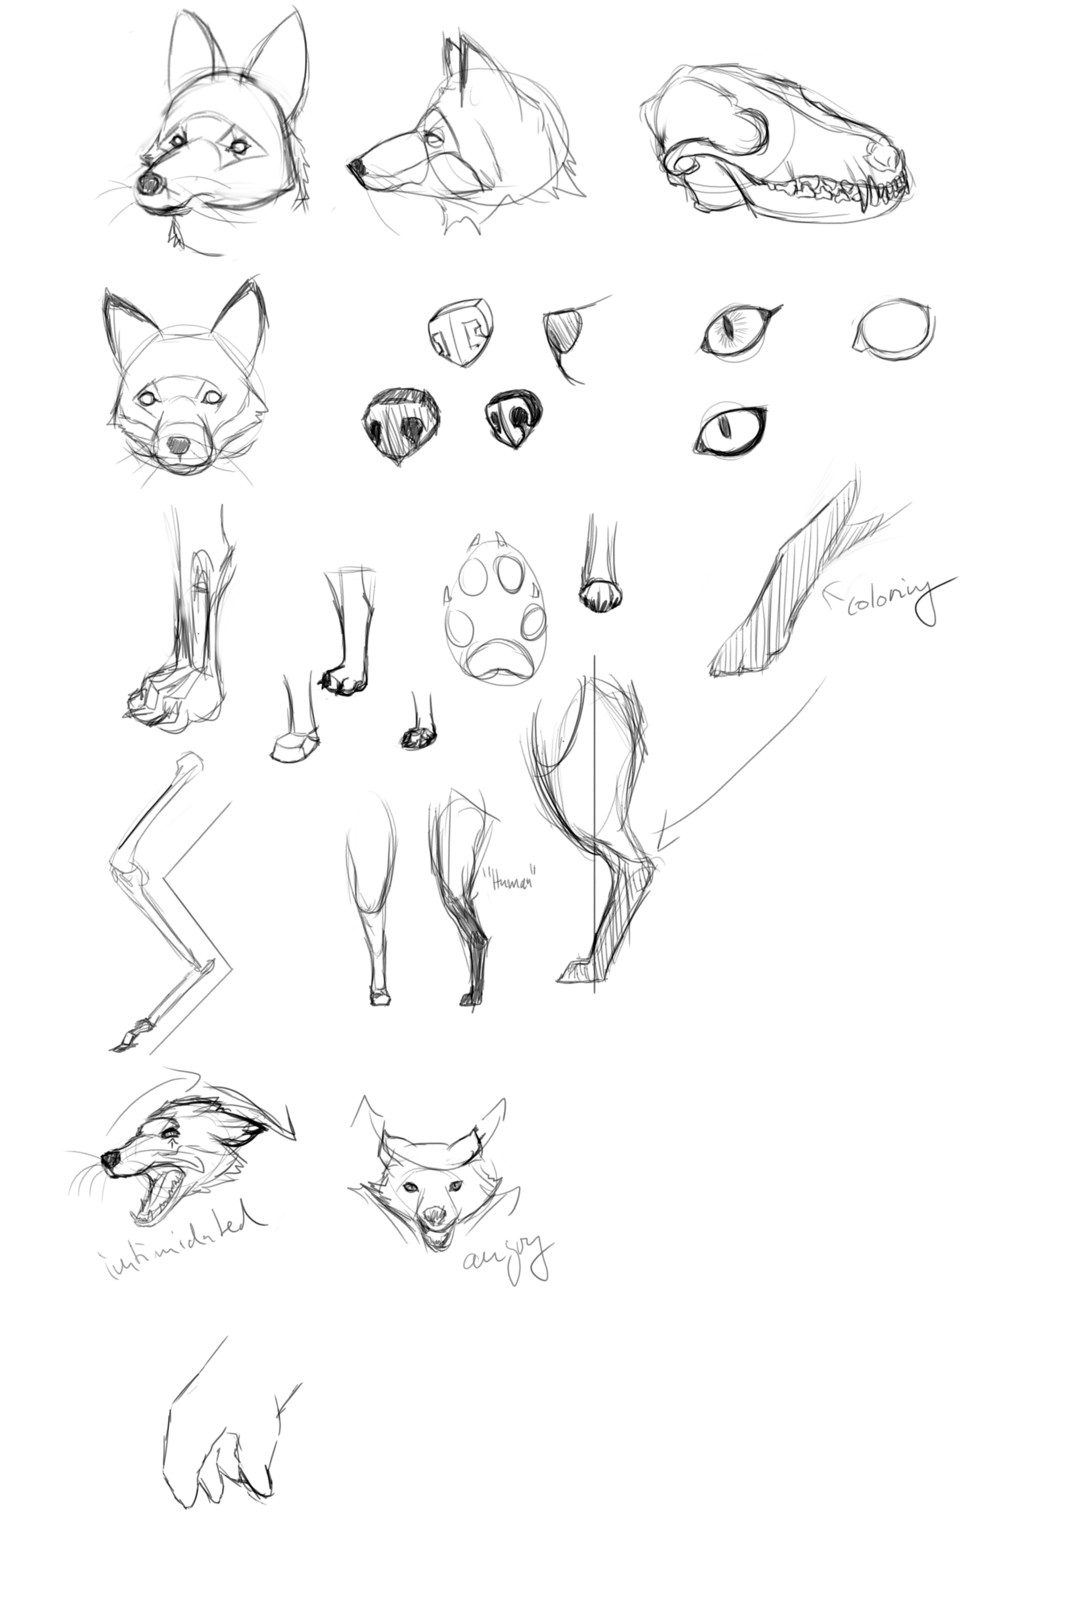 One of the cleaner examples of me tackling fox anatomy. 